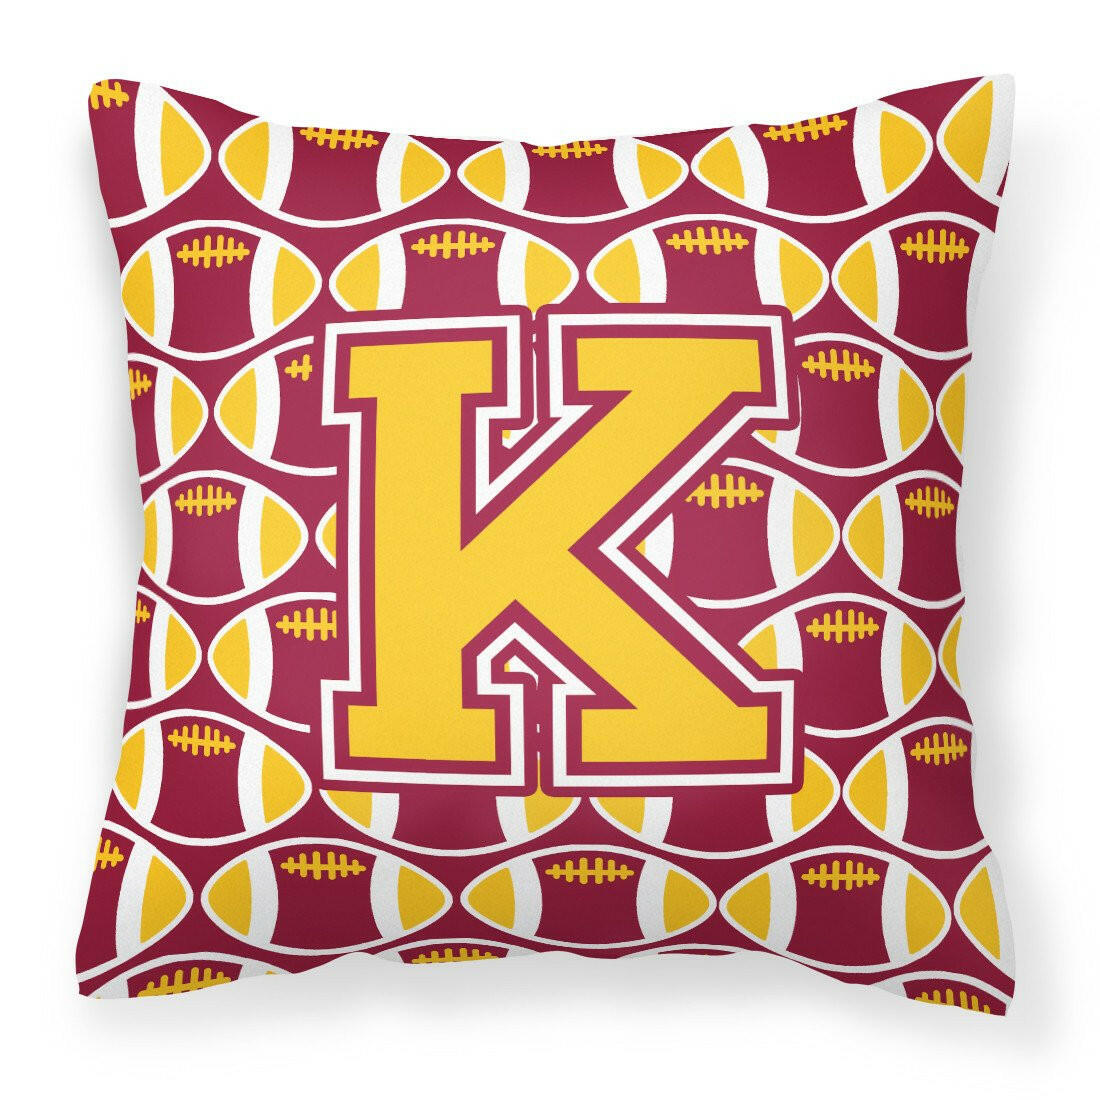 Letter K Football Maroon and Gold Fabric Decorative Pillow CJ1081-KPW1414 by Caroline's Treasures